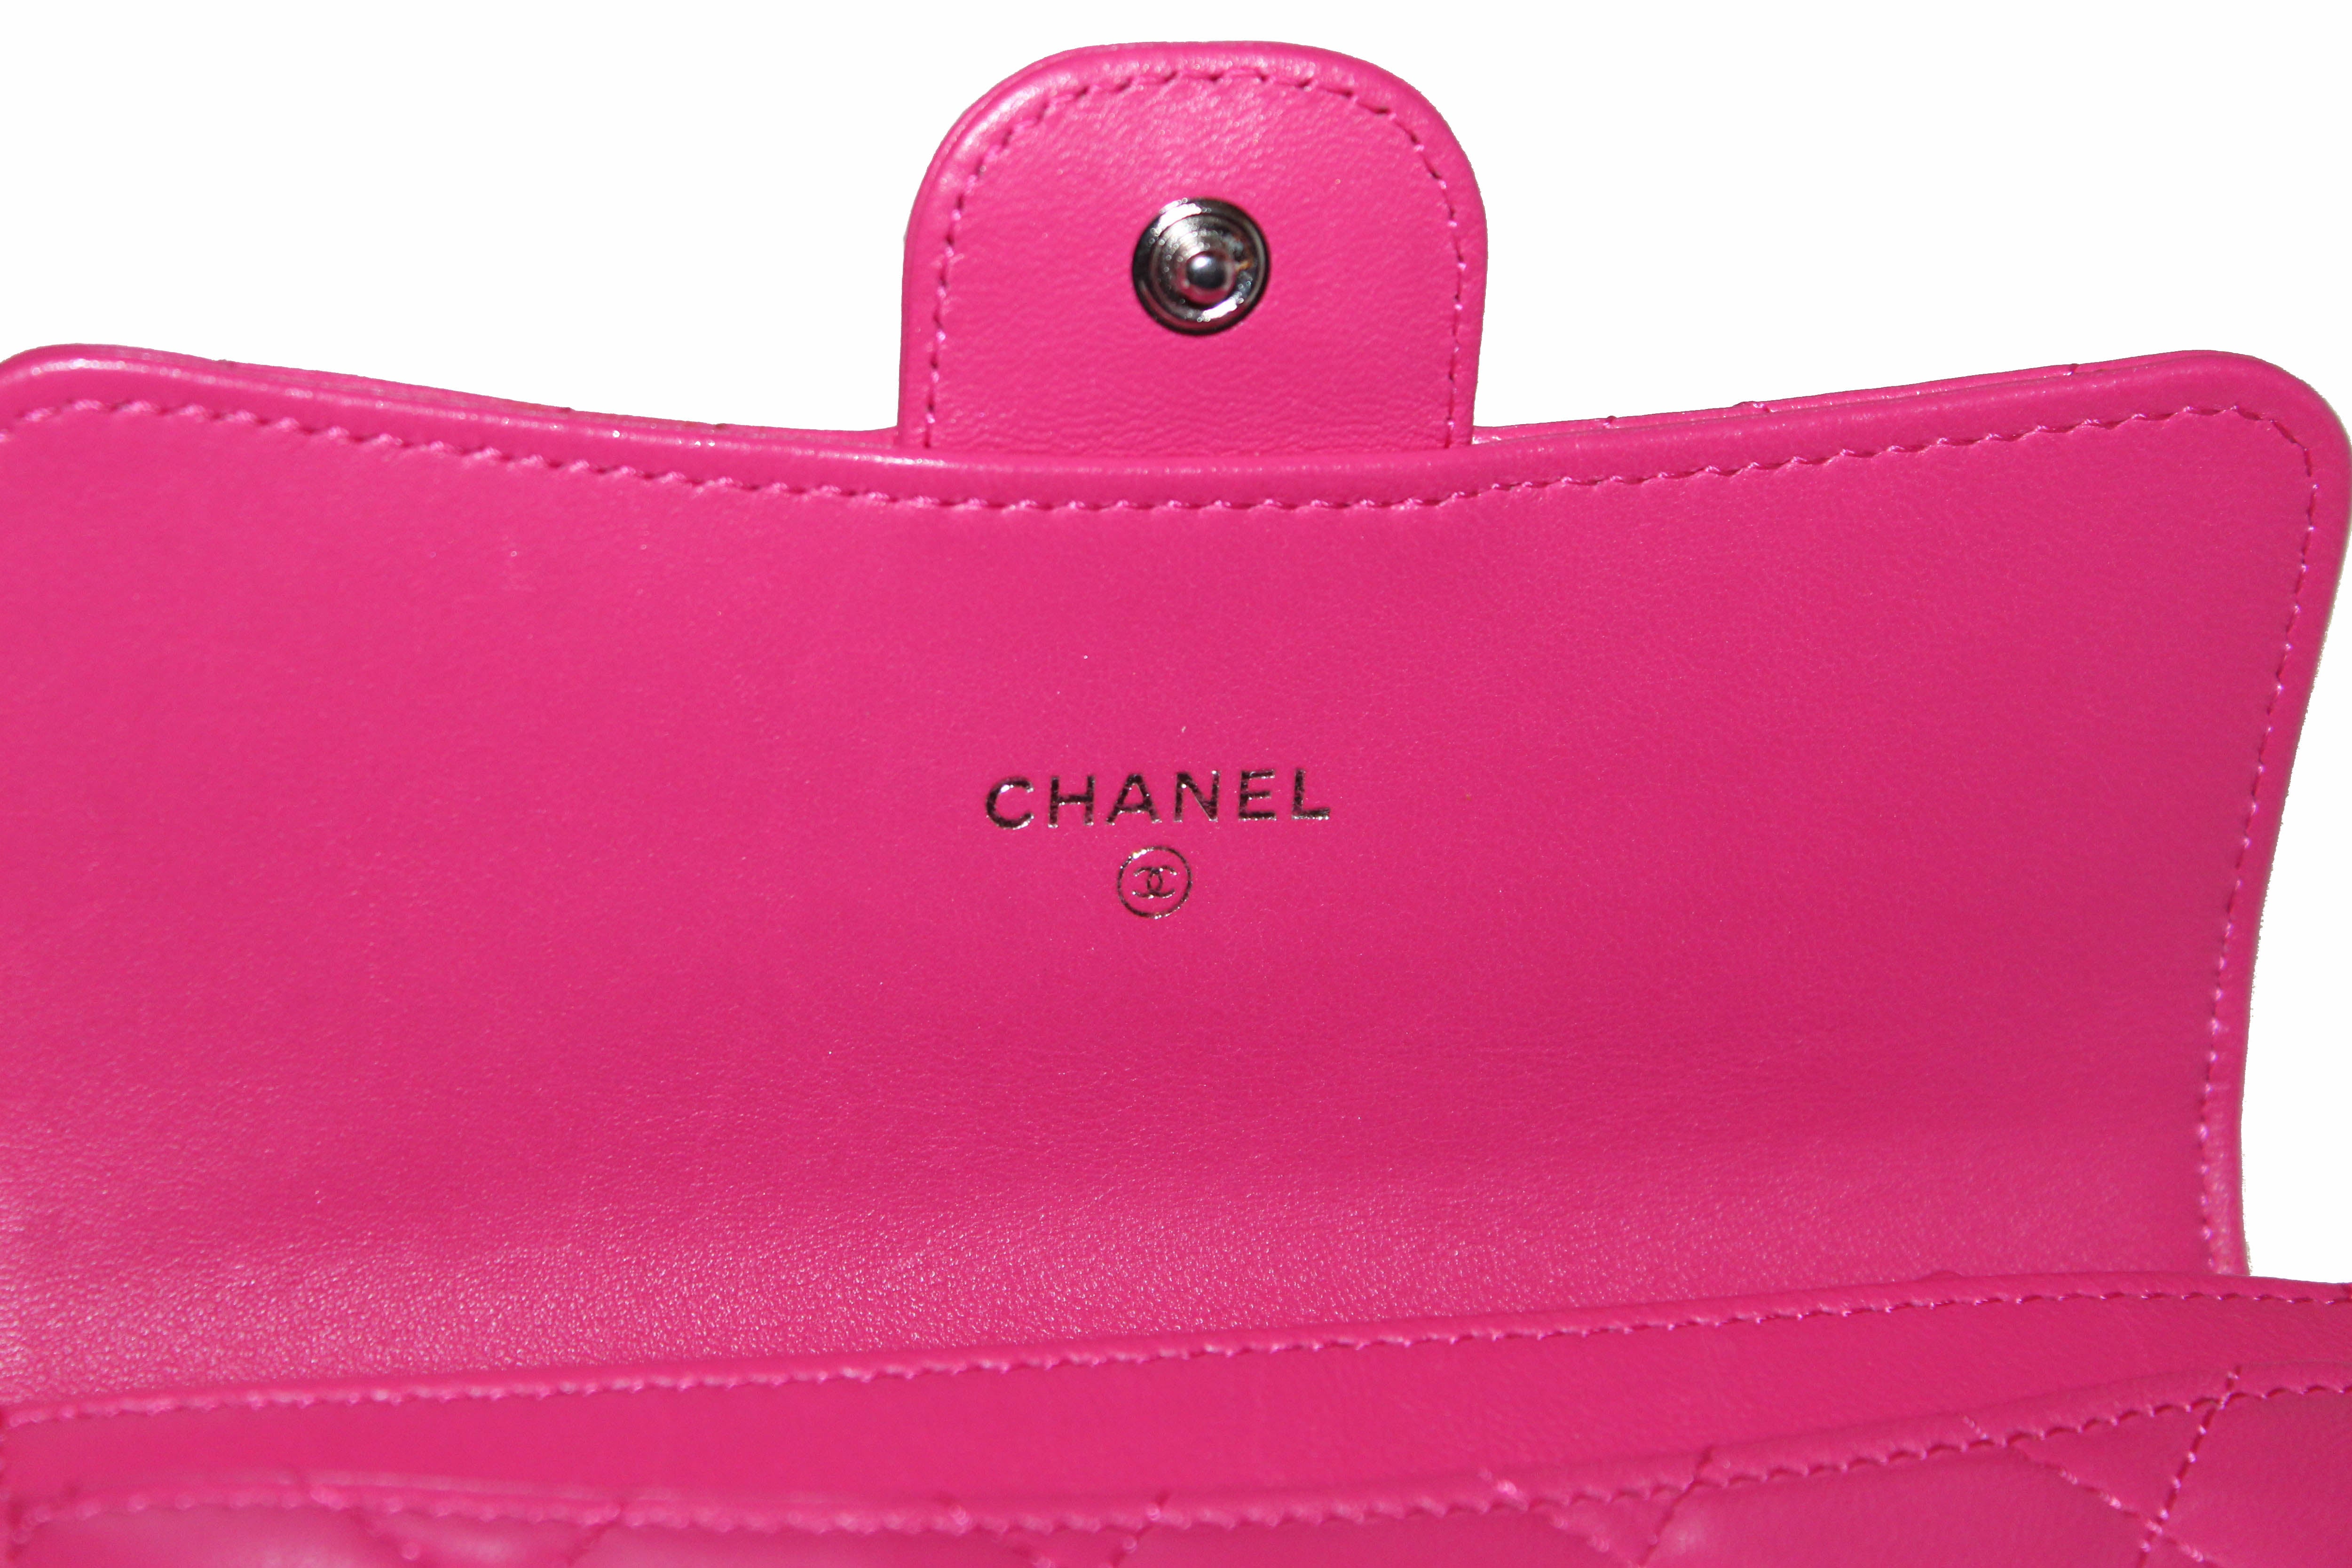 Authentic Chanel Pink Quilted Lambskin Leather Classic Flap Wallet